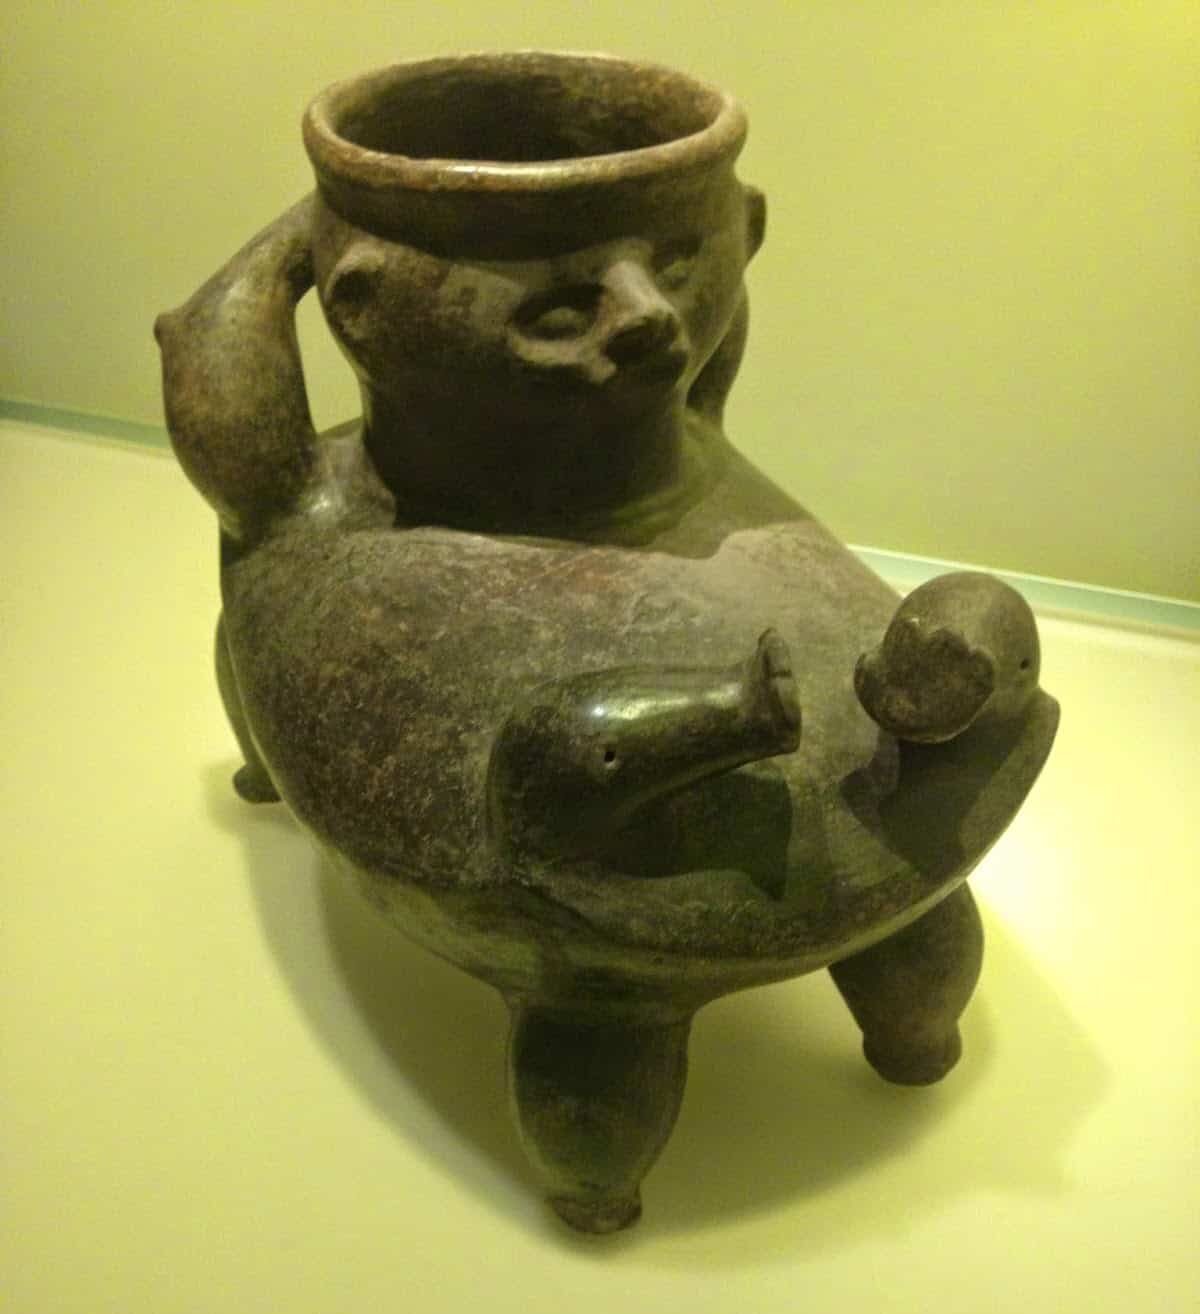 Ceramic work in the Gold Museum in Bogotá, Colombia